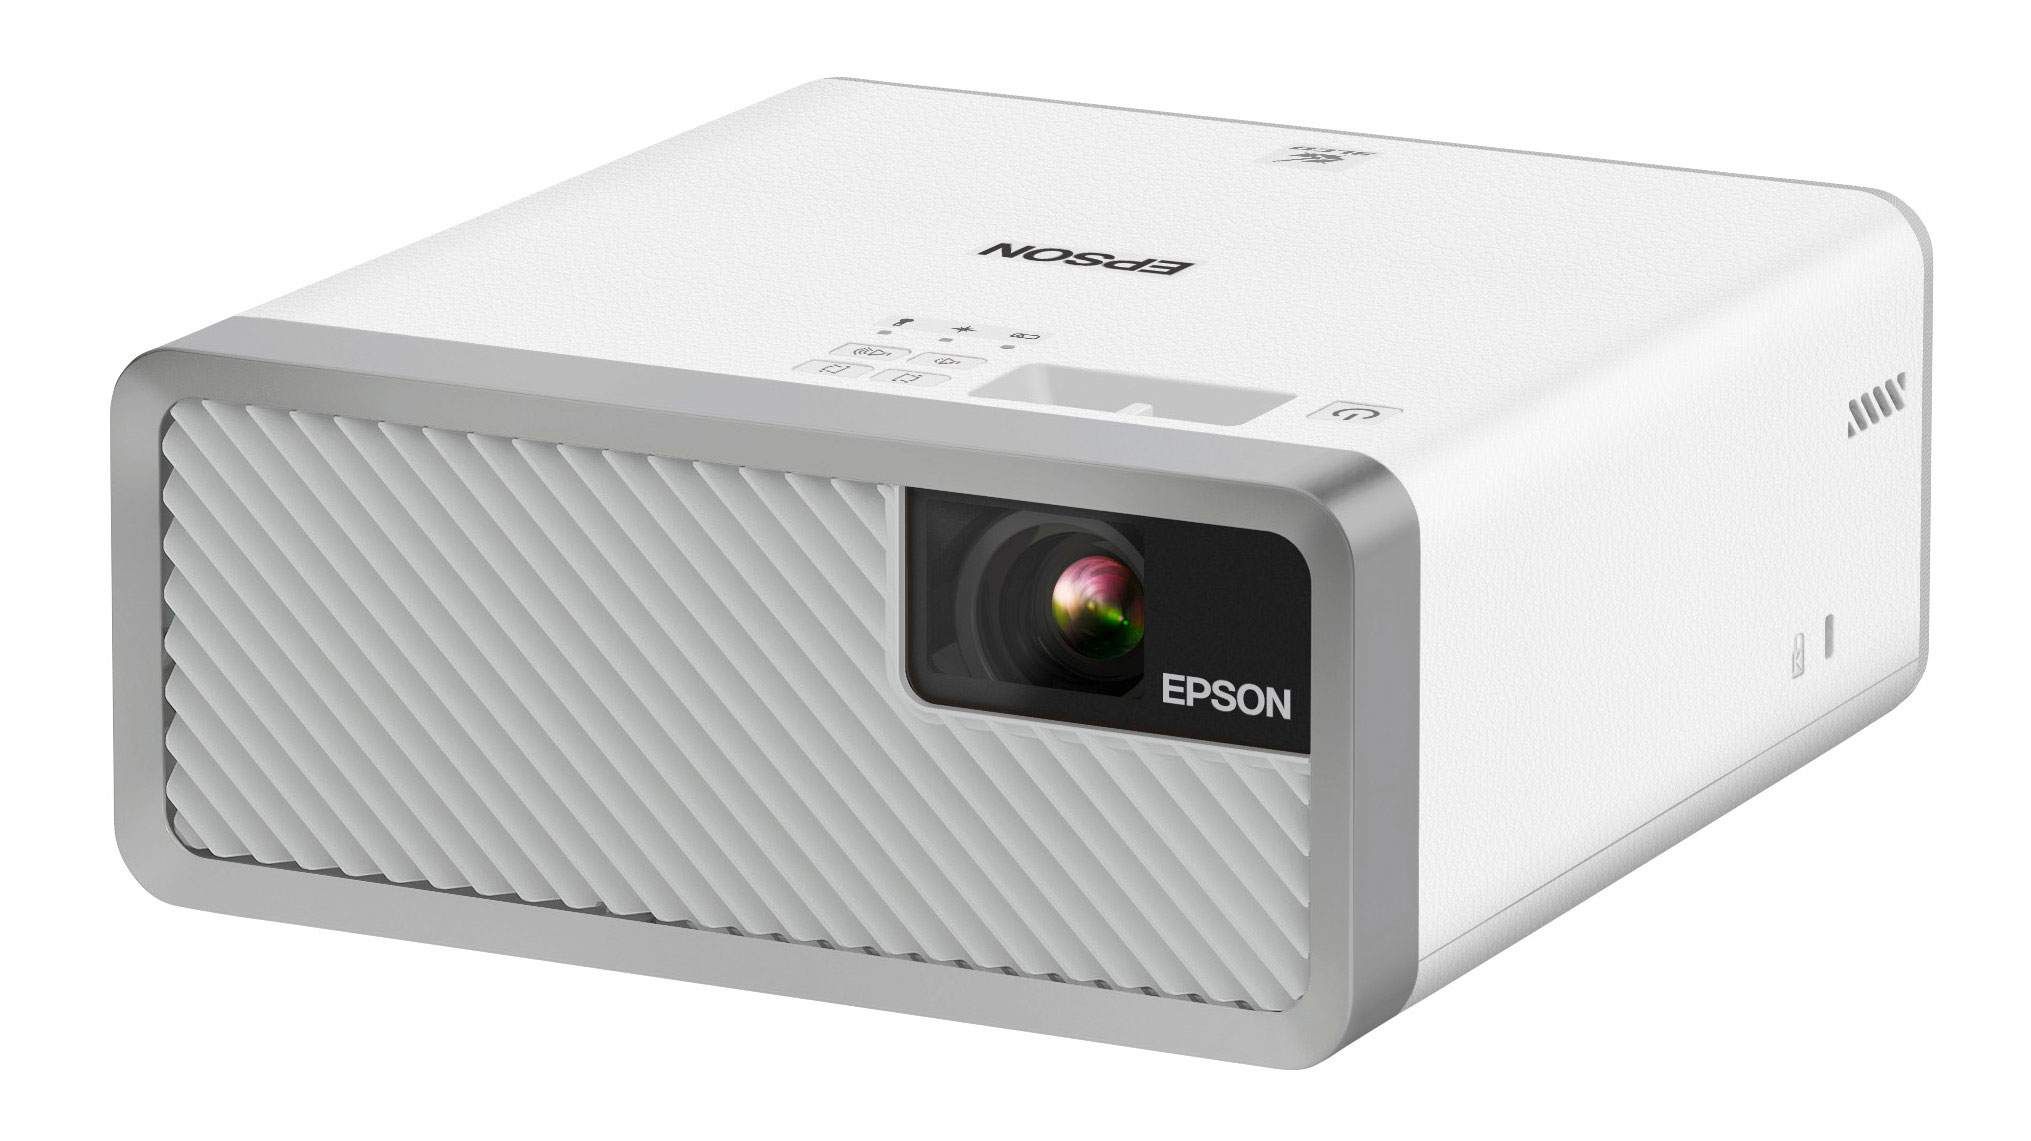 Elegantly compact and designed to instantly stream your favorite content – virtually anywhere – the Epson EF-100 produces an incredibly bright and colorful image up to 150 inches.